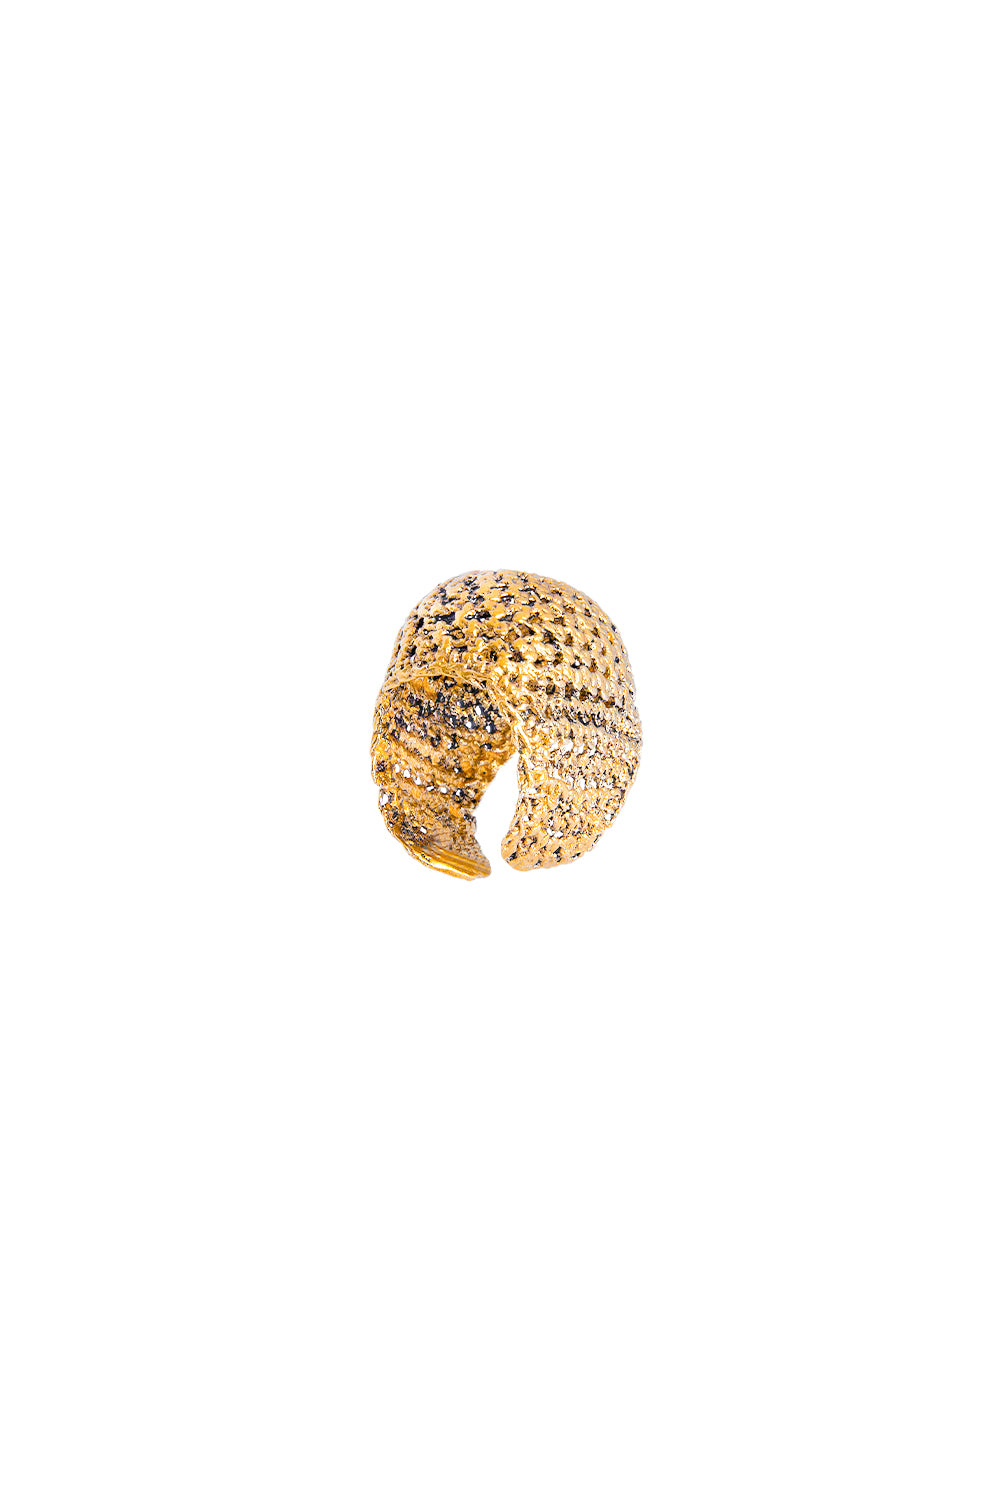 GOLD DOME RING